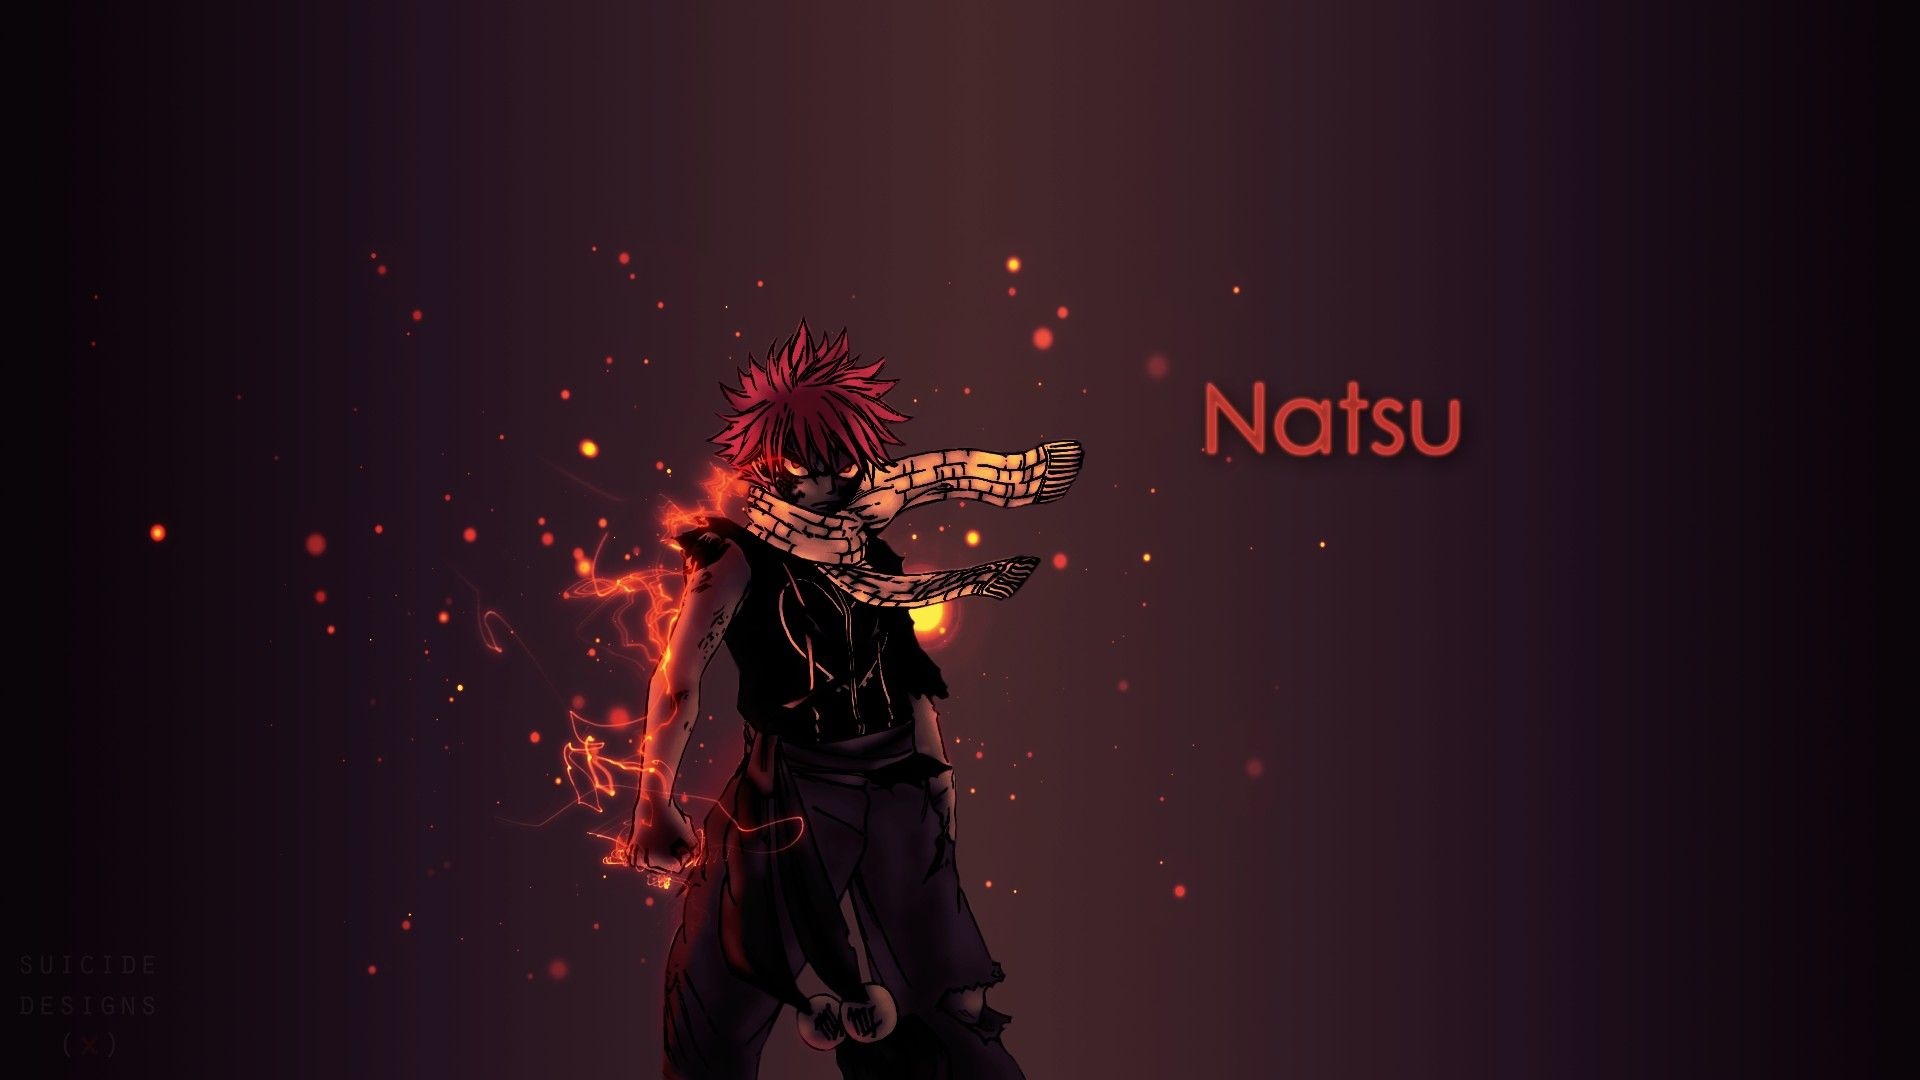 Natsu (Fairy Tail): The protagonist of the manga, Raised by Igneel, the fire dragon. 1920x1080 Full HD Wallpaper.